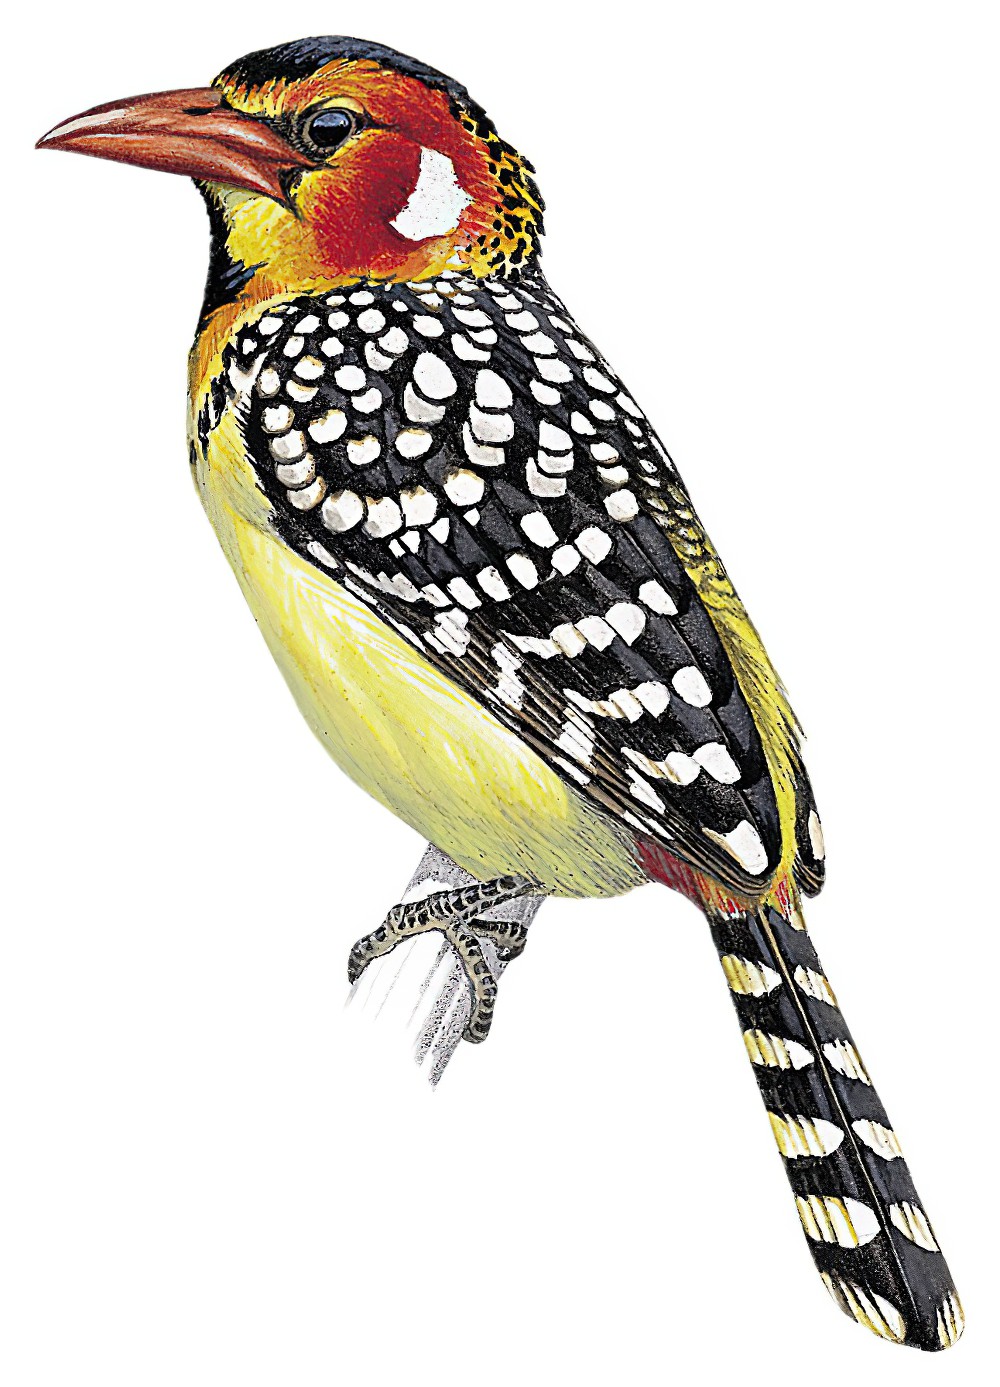 Red-and-yellow Barbet / Trachyphonus erythrocephalus